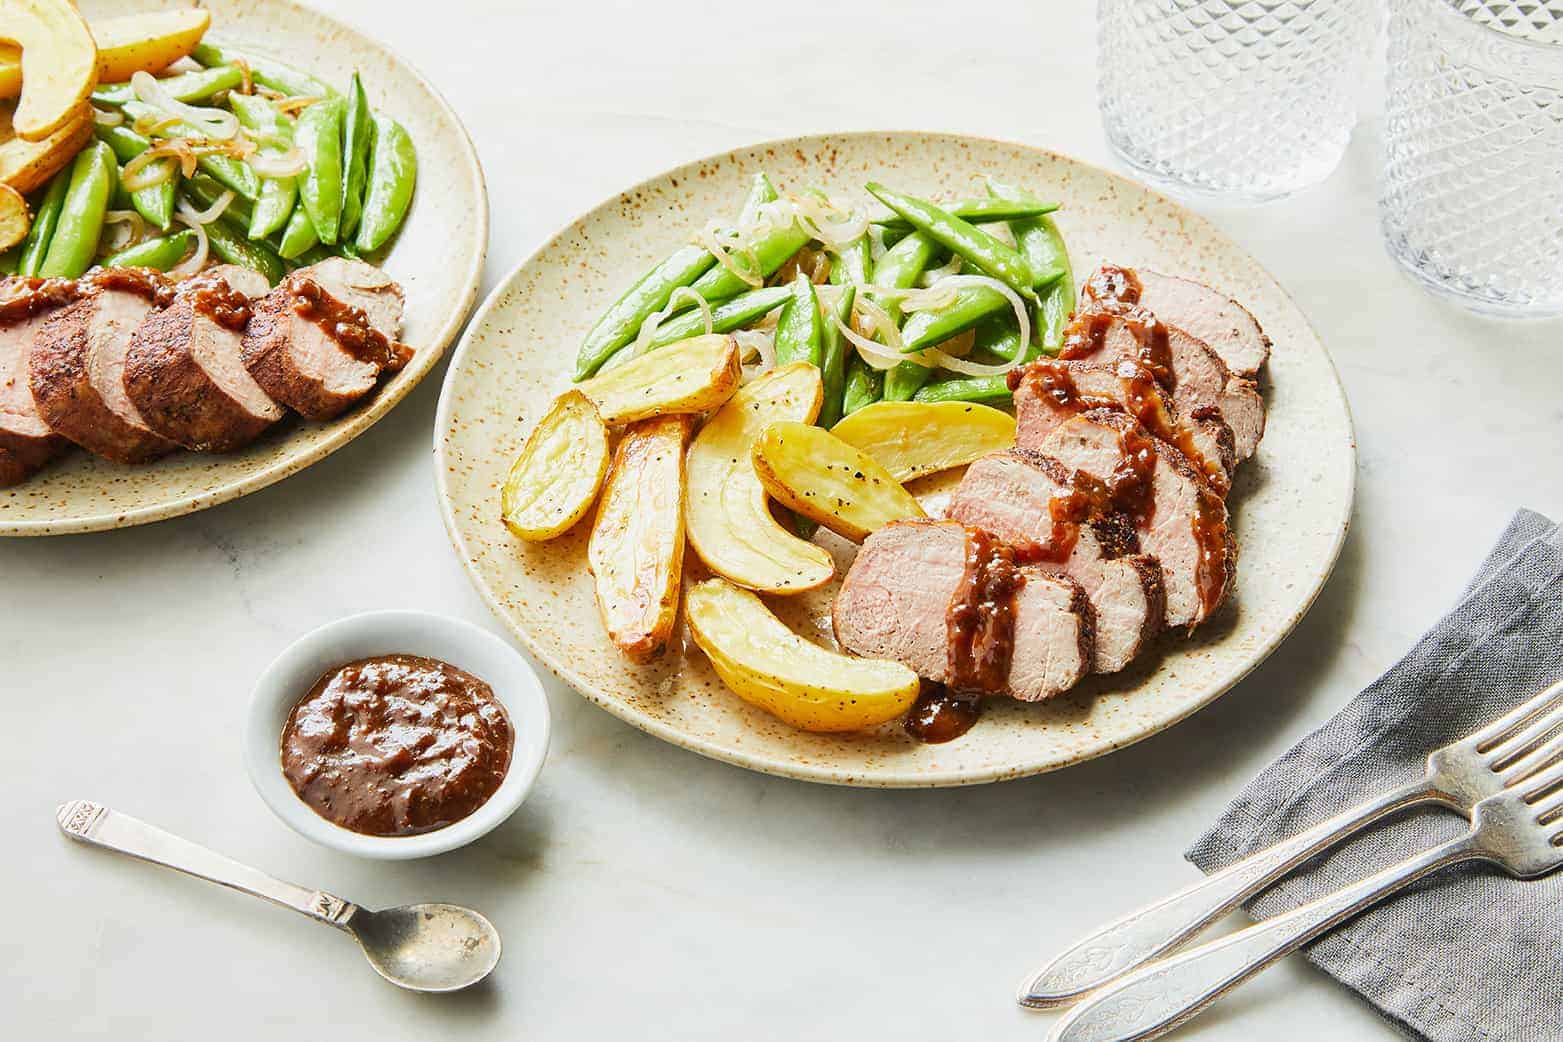 a plate filled with potatoes, prune-glazed pork tenderloin and snap peas